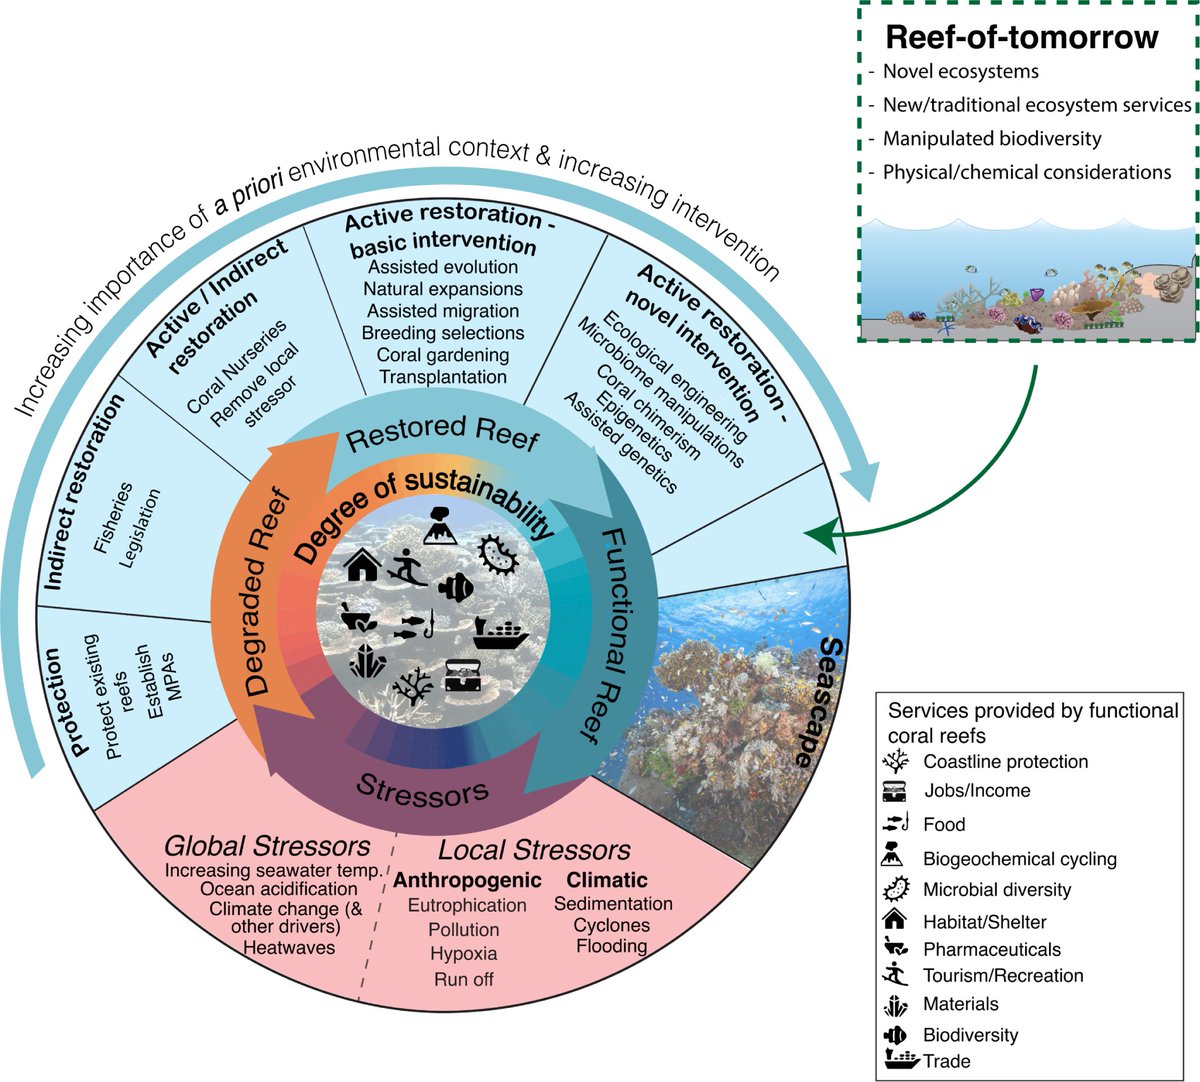 Coral reef #restoration faces many challenges. @HLBurdett &co advocate for prioritizing #environmental and #climate considerations to increase the sustainability of future #CoralReefs and open up opportunities for new restoration approaches. plos.io/3Pv8ui6